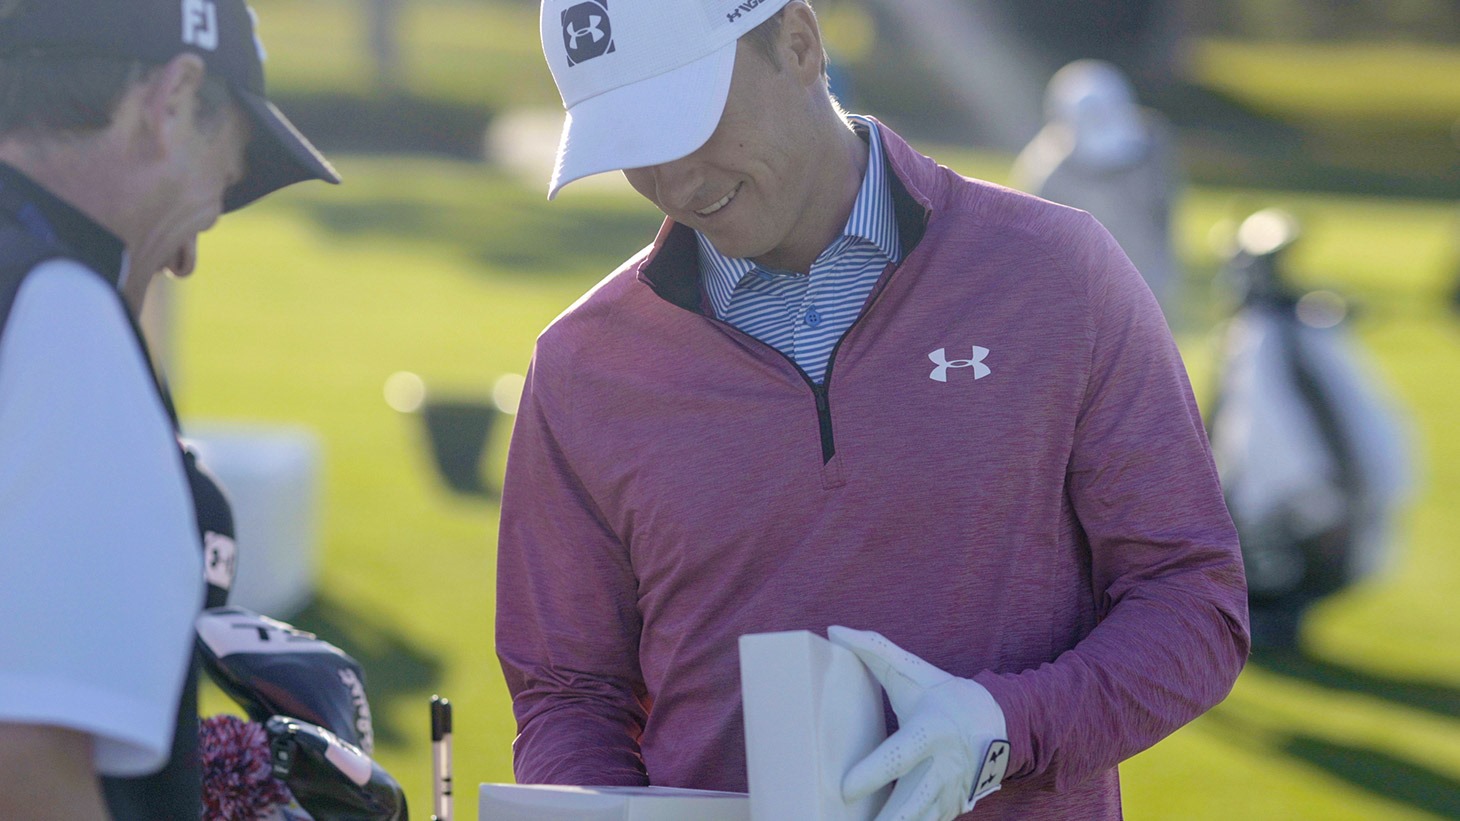 Fordie Pitts, Tour Consultant for Golf Ball R&D, discusses a new Titleist prototype golf ball with Jordan Spieth